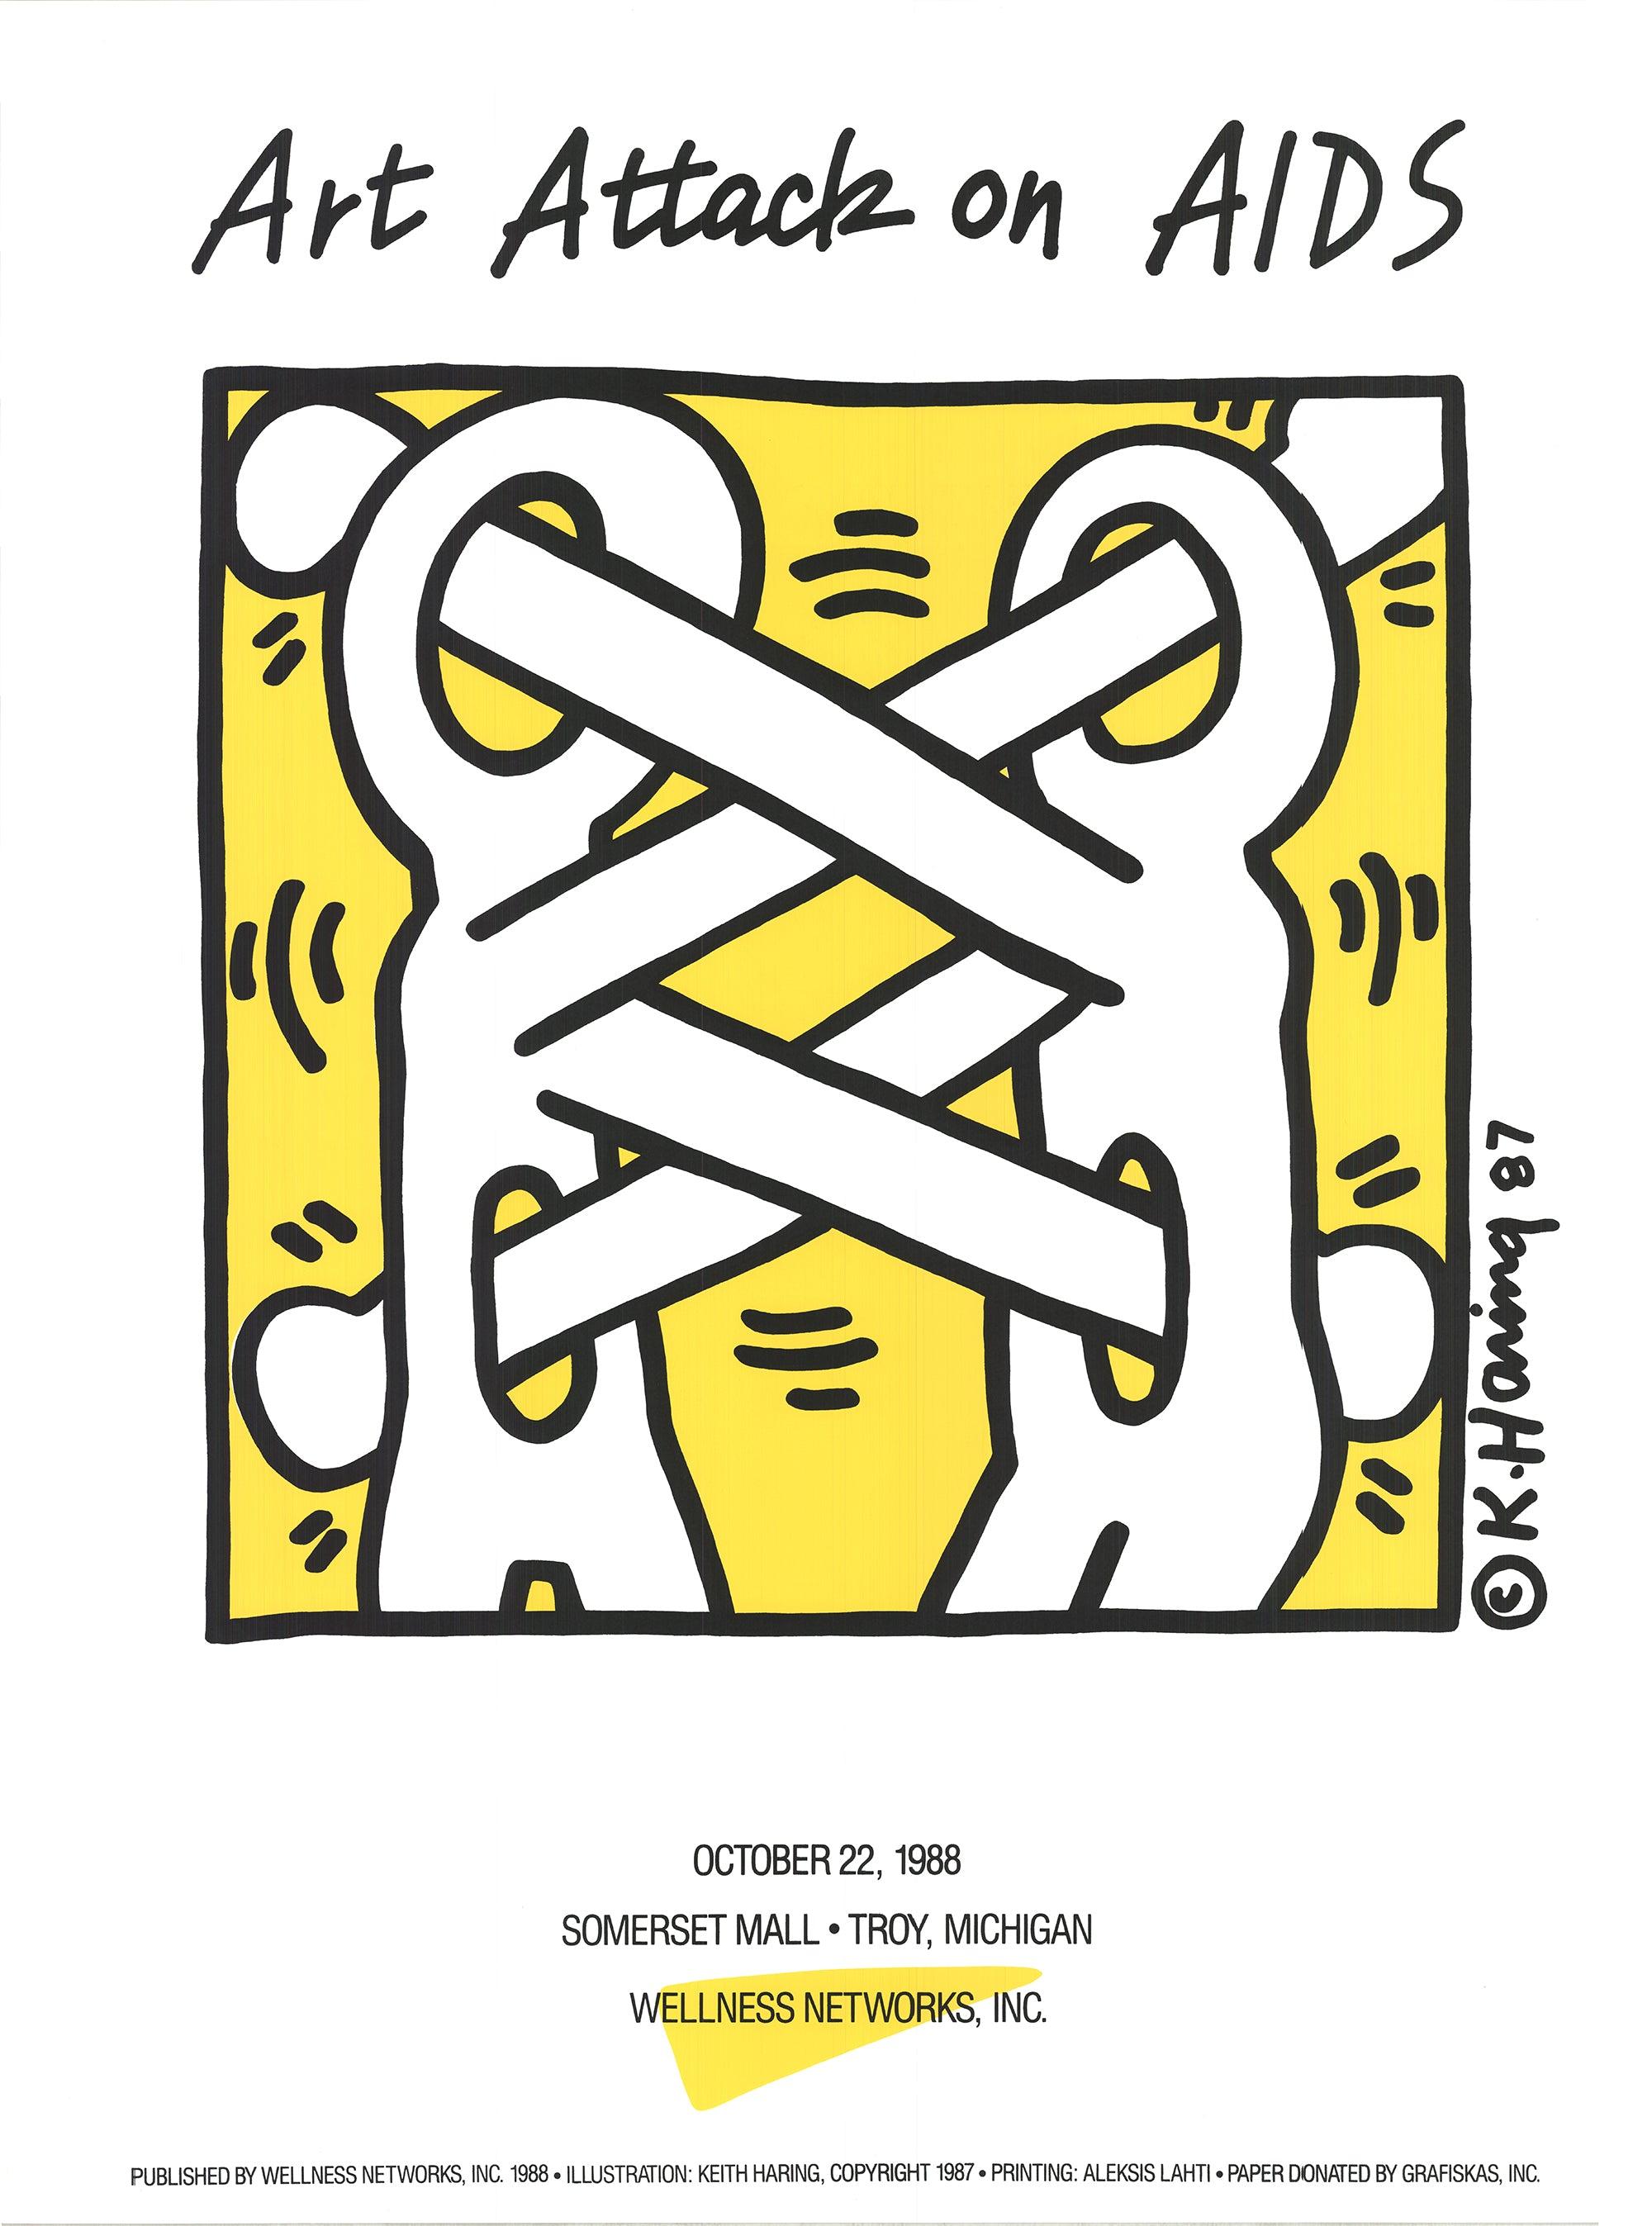 KEITH HARING Art Attack on AIDS, 1988 - Print by Keith Haring